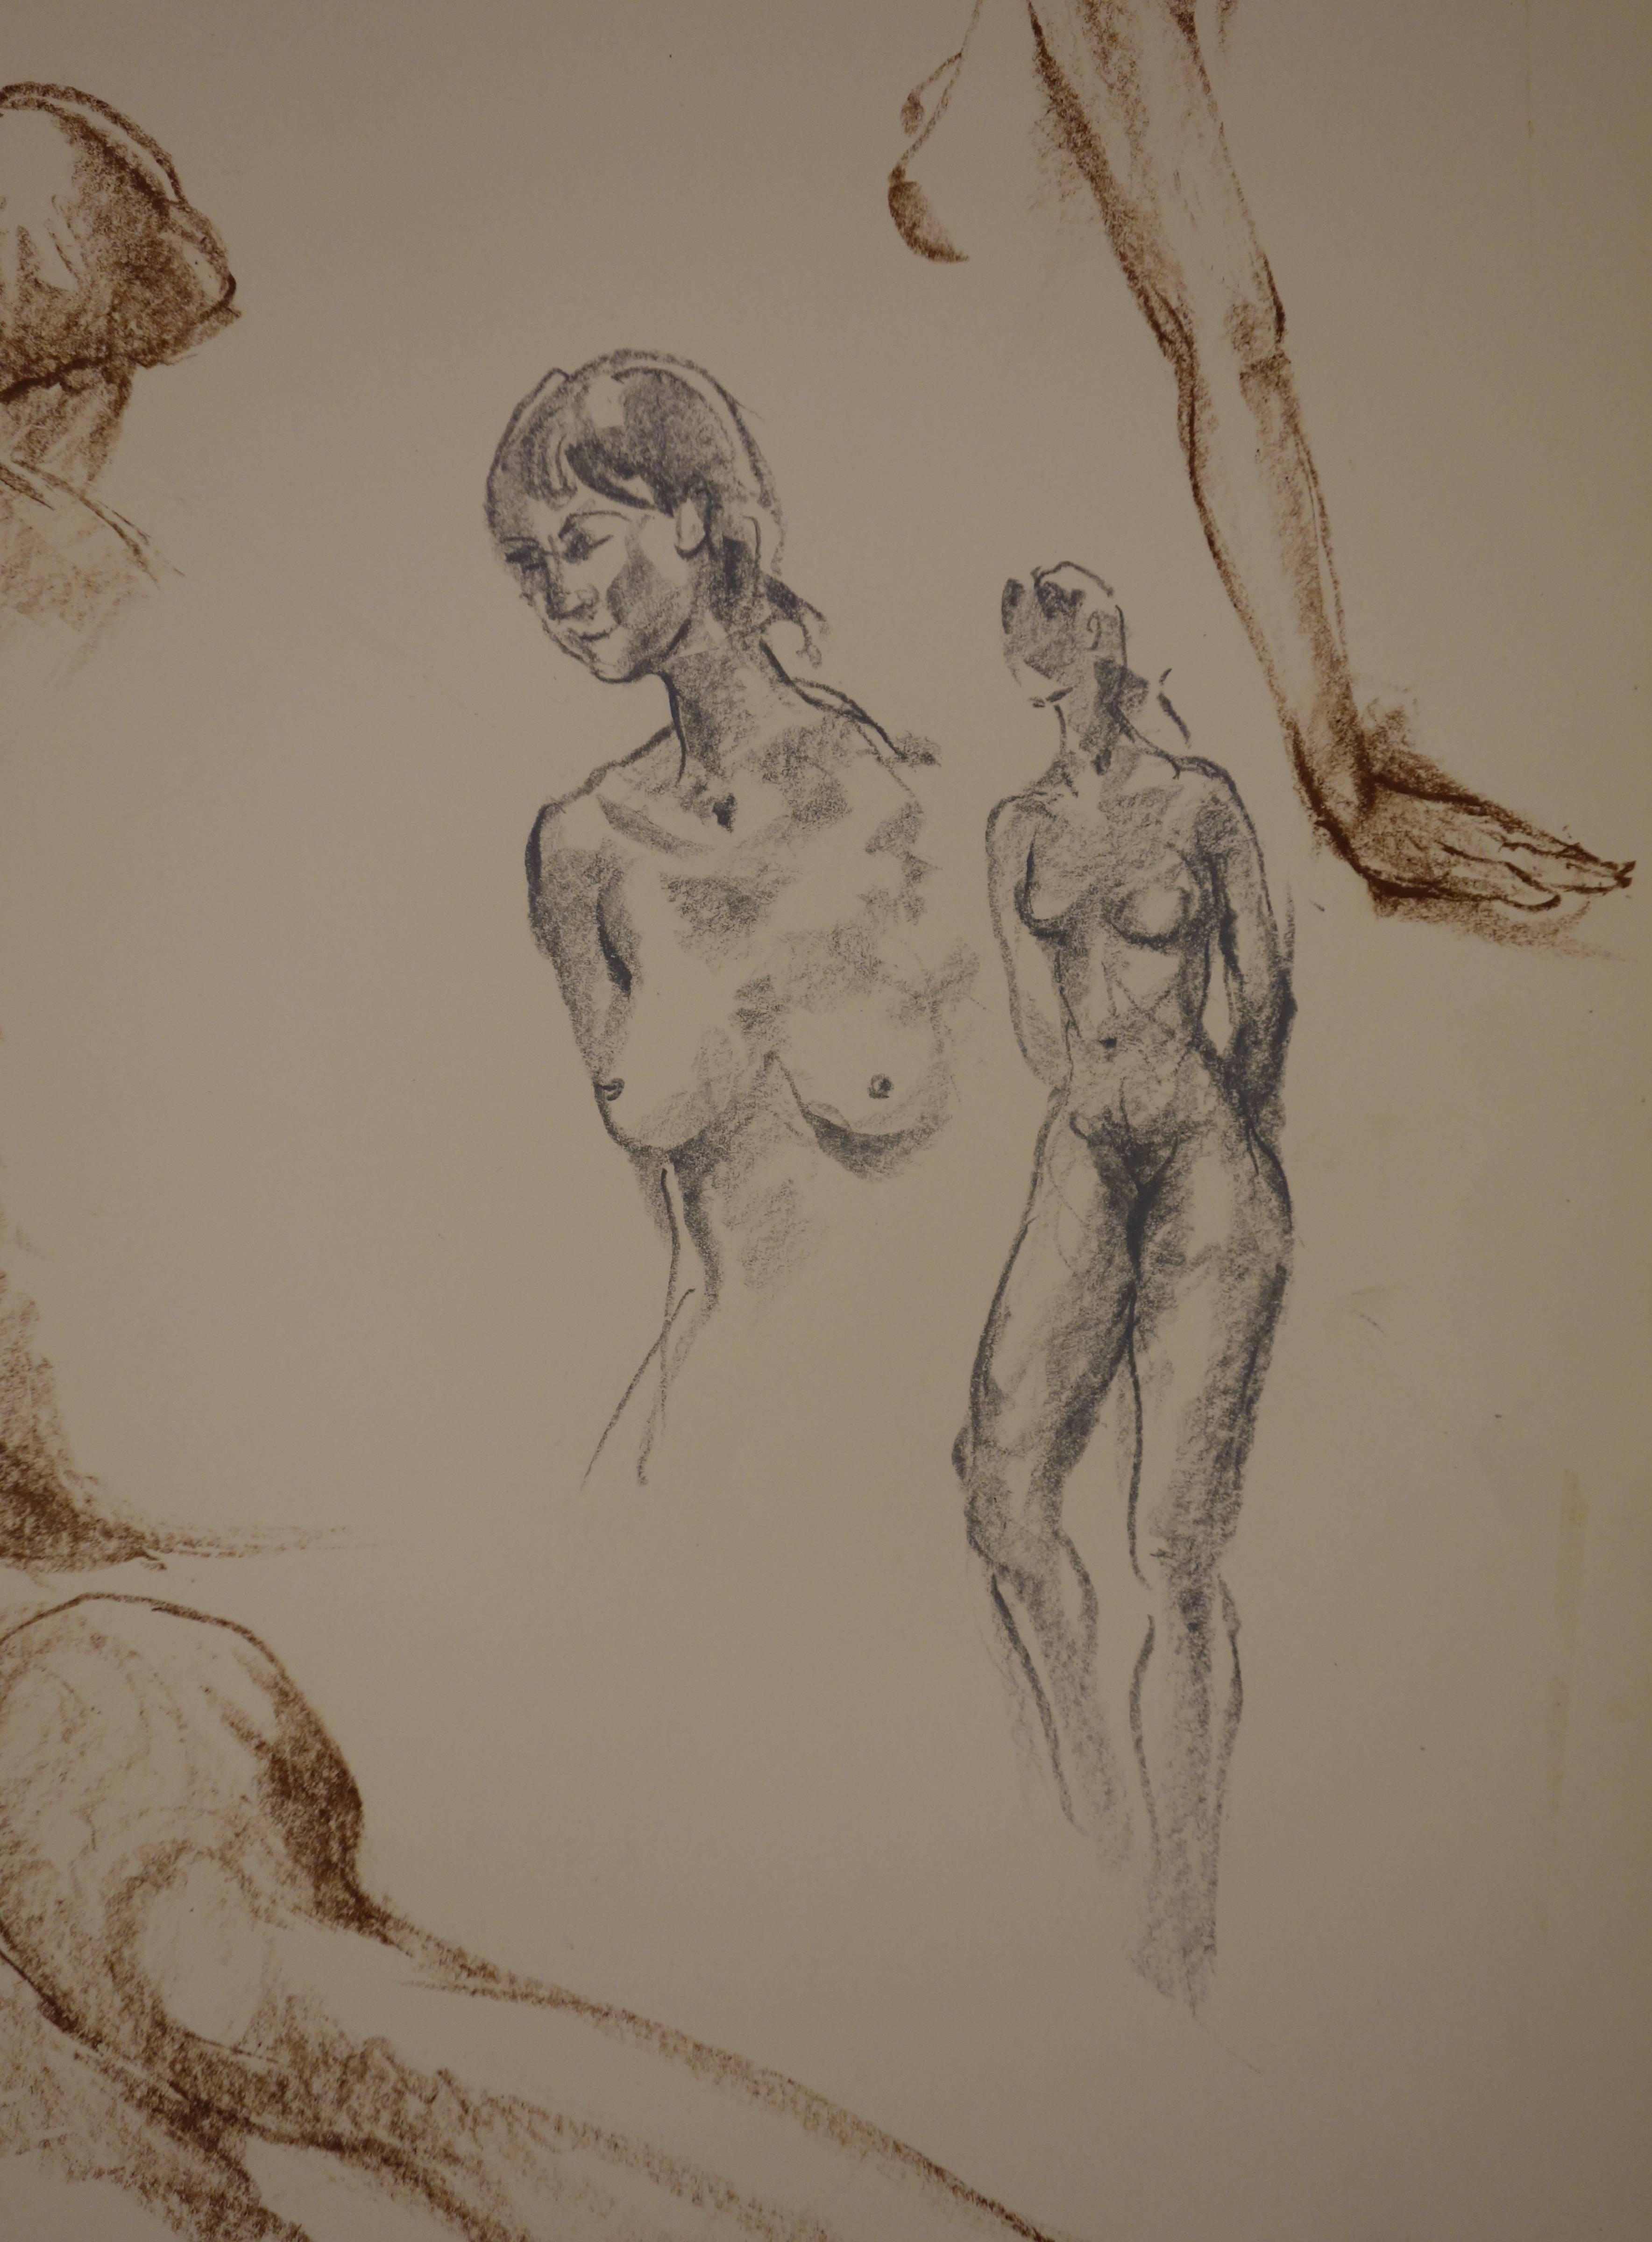 Gaston COPPENS (1909 - 2002)
Nude Studies in Brown and Grey

Original charcoal drawing
Stamp signature of the artist in the bottom right corner
On wove paper 48 x 37 cm (c 19 x 15 inch)

Excellent condition

Gaston Coppens studied sculpture in the